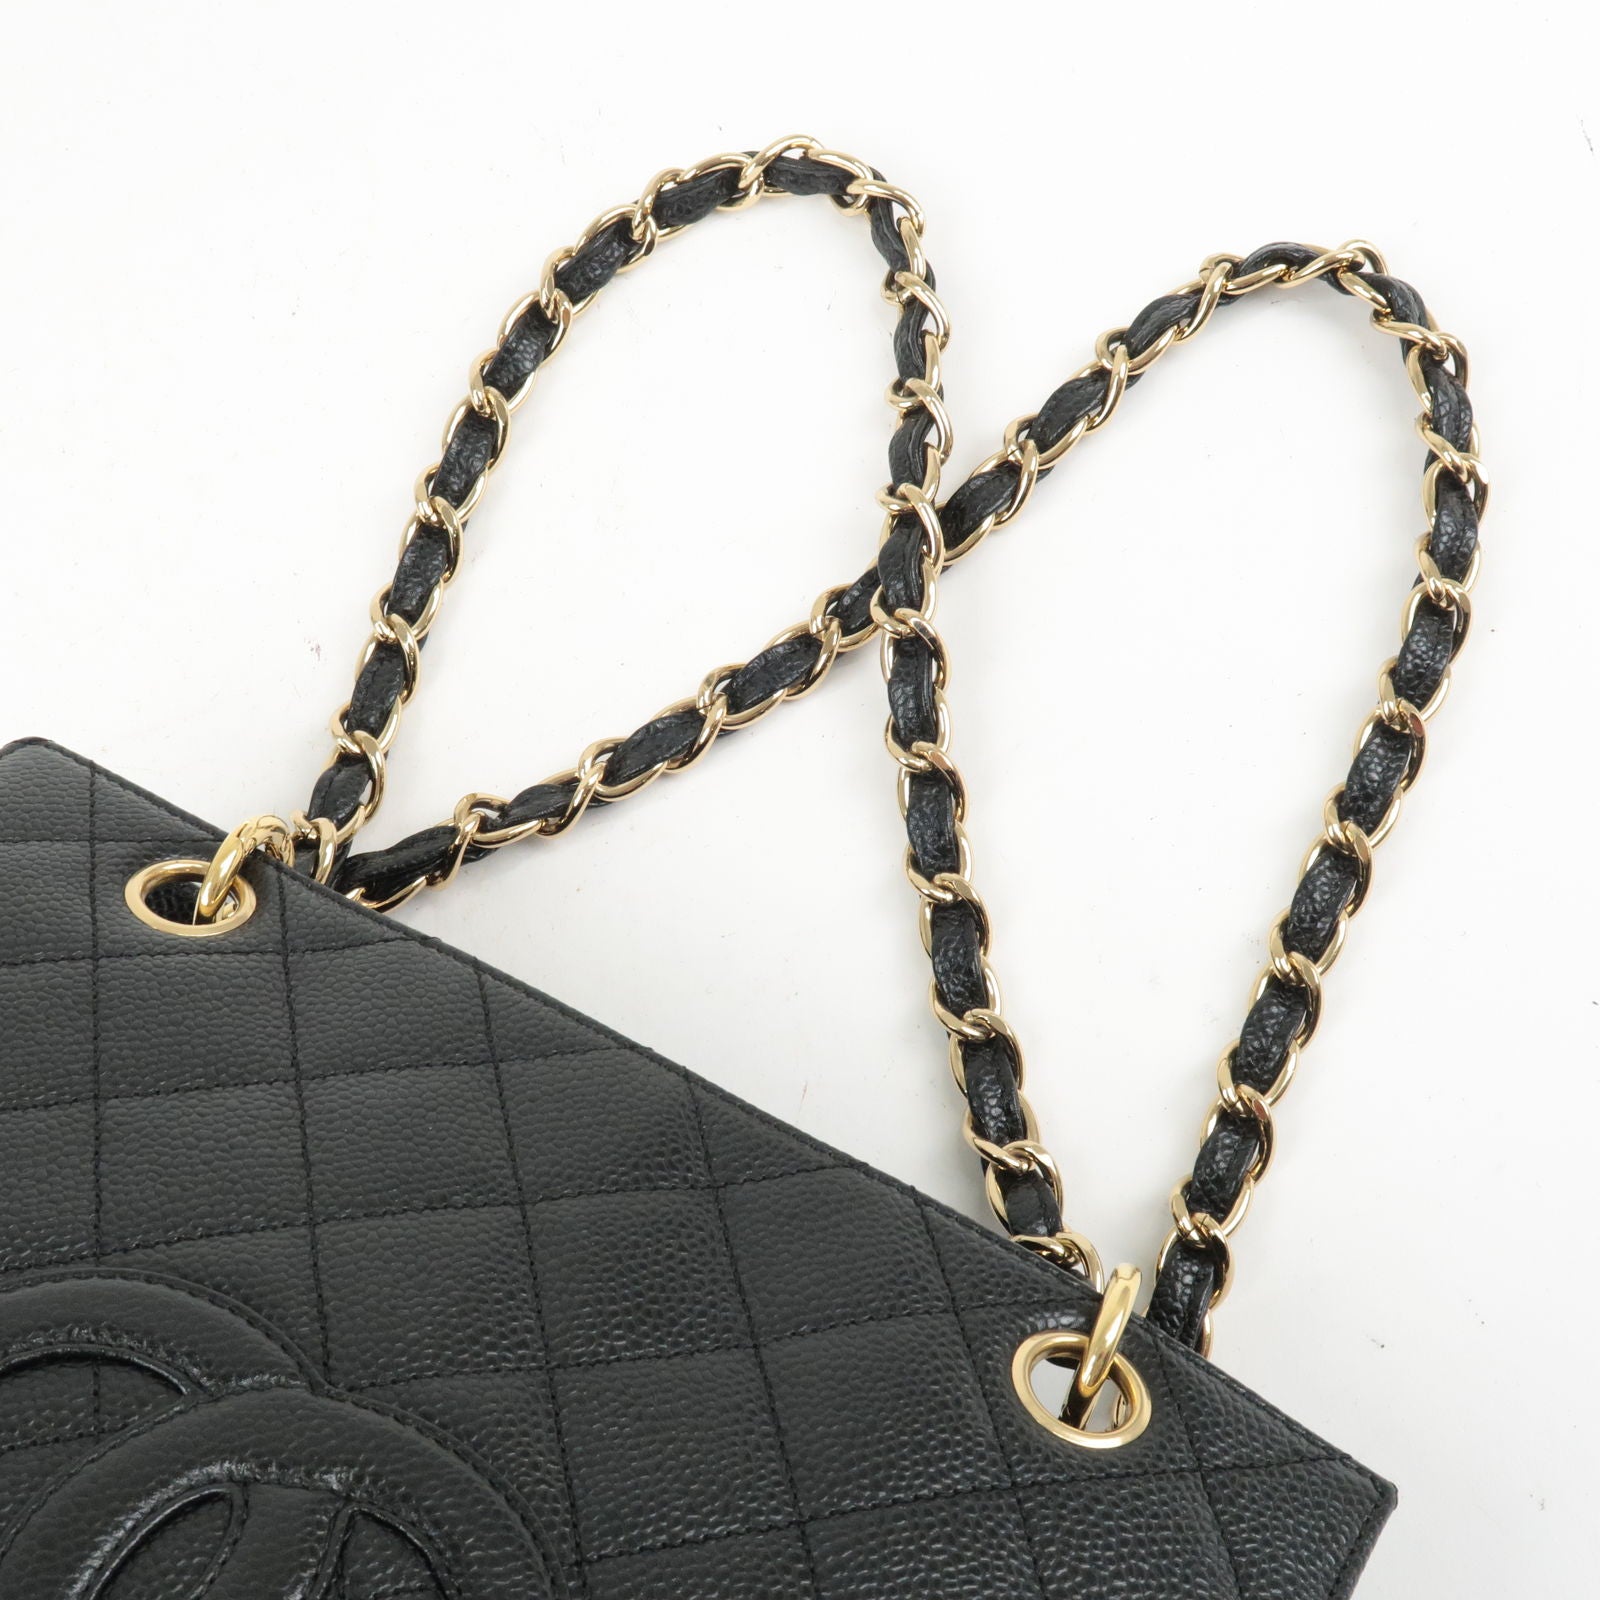 chanel quilted purse black